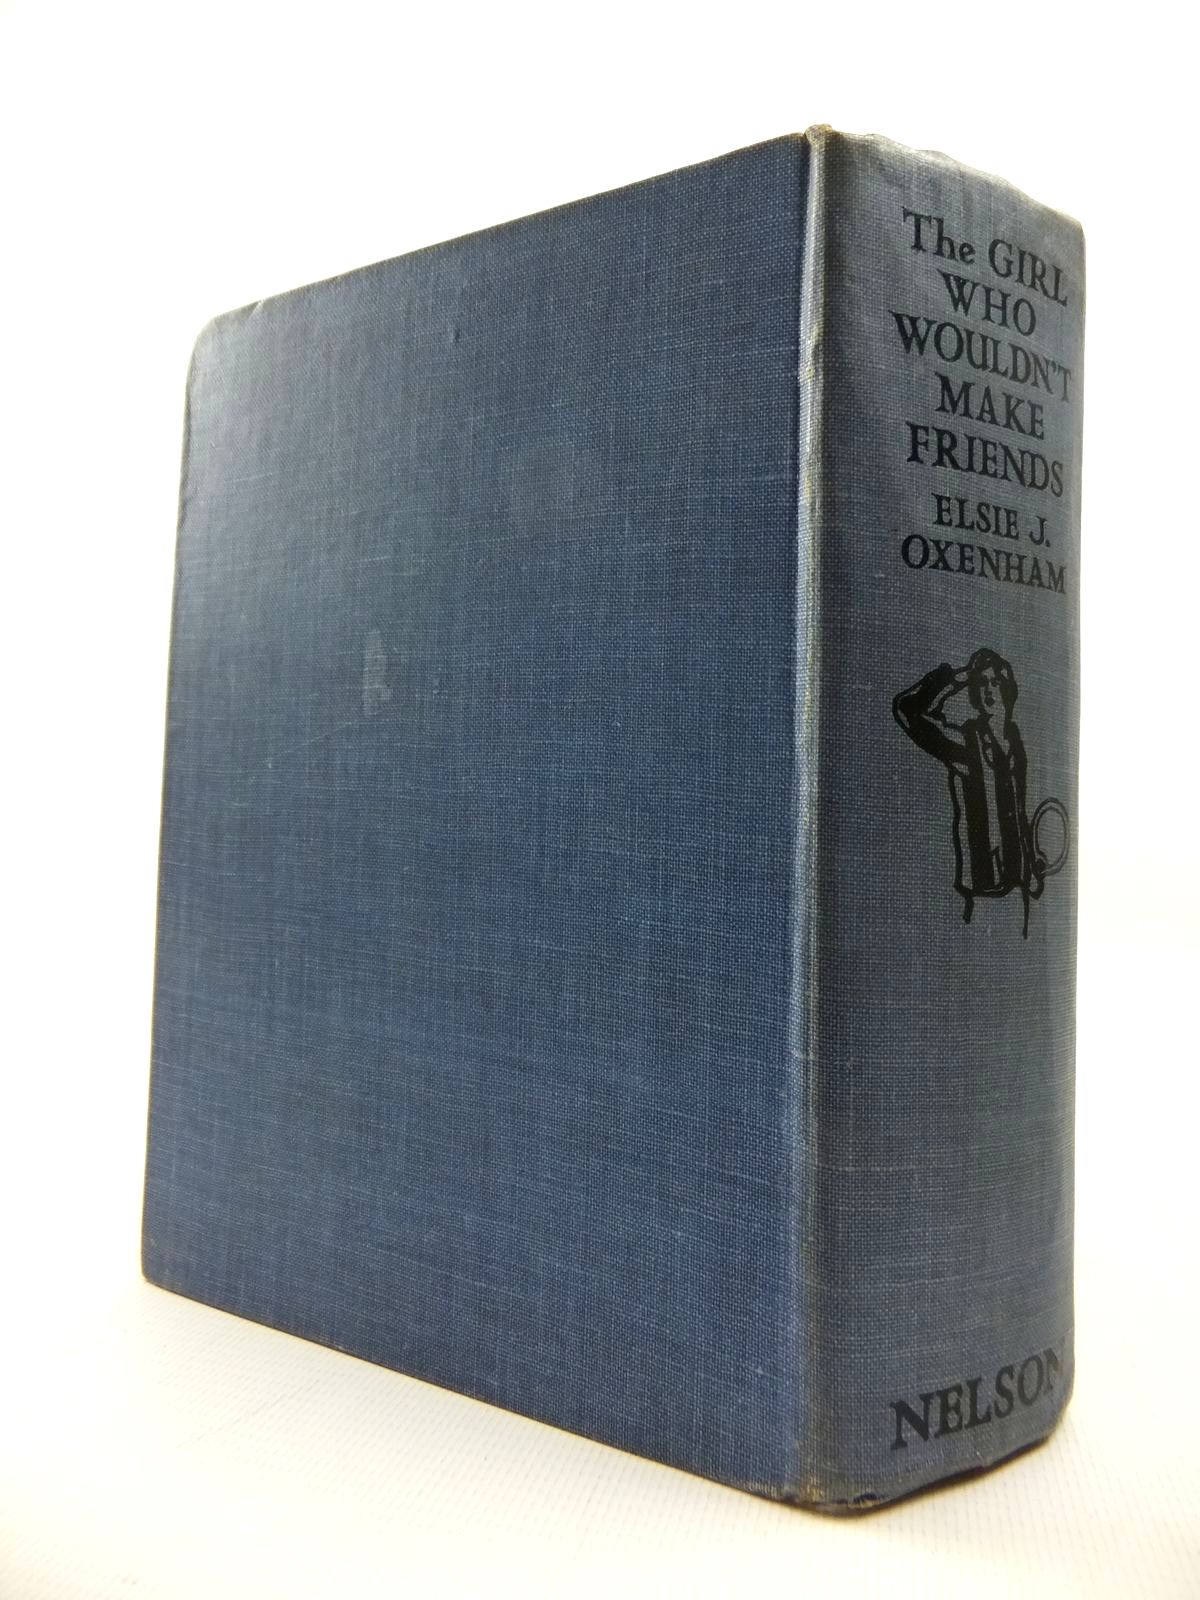 Photo of THE GIRL WHO WOULDN'T MAKE FRIENDS written by Oxenham, Elsie J. illustrated by Hickling, P.B. published by Thomas Nelson and Sons Ltd. (STOCK CODE: 1814693)  for sale by Stella & Rose's Books